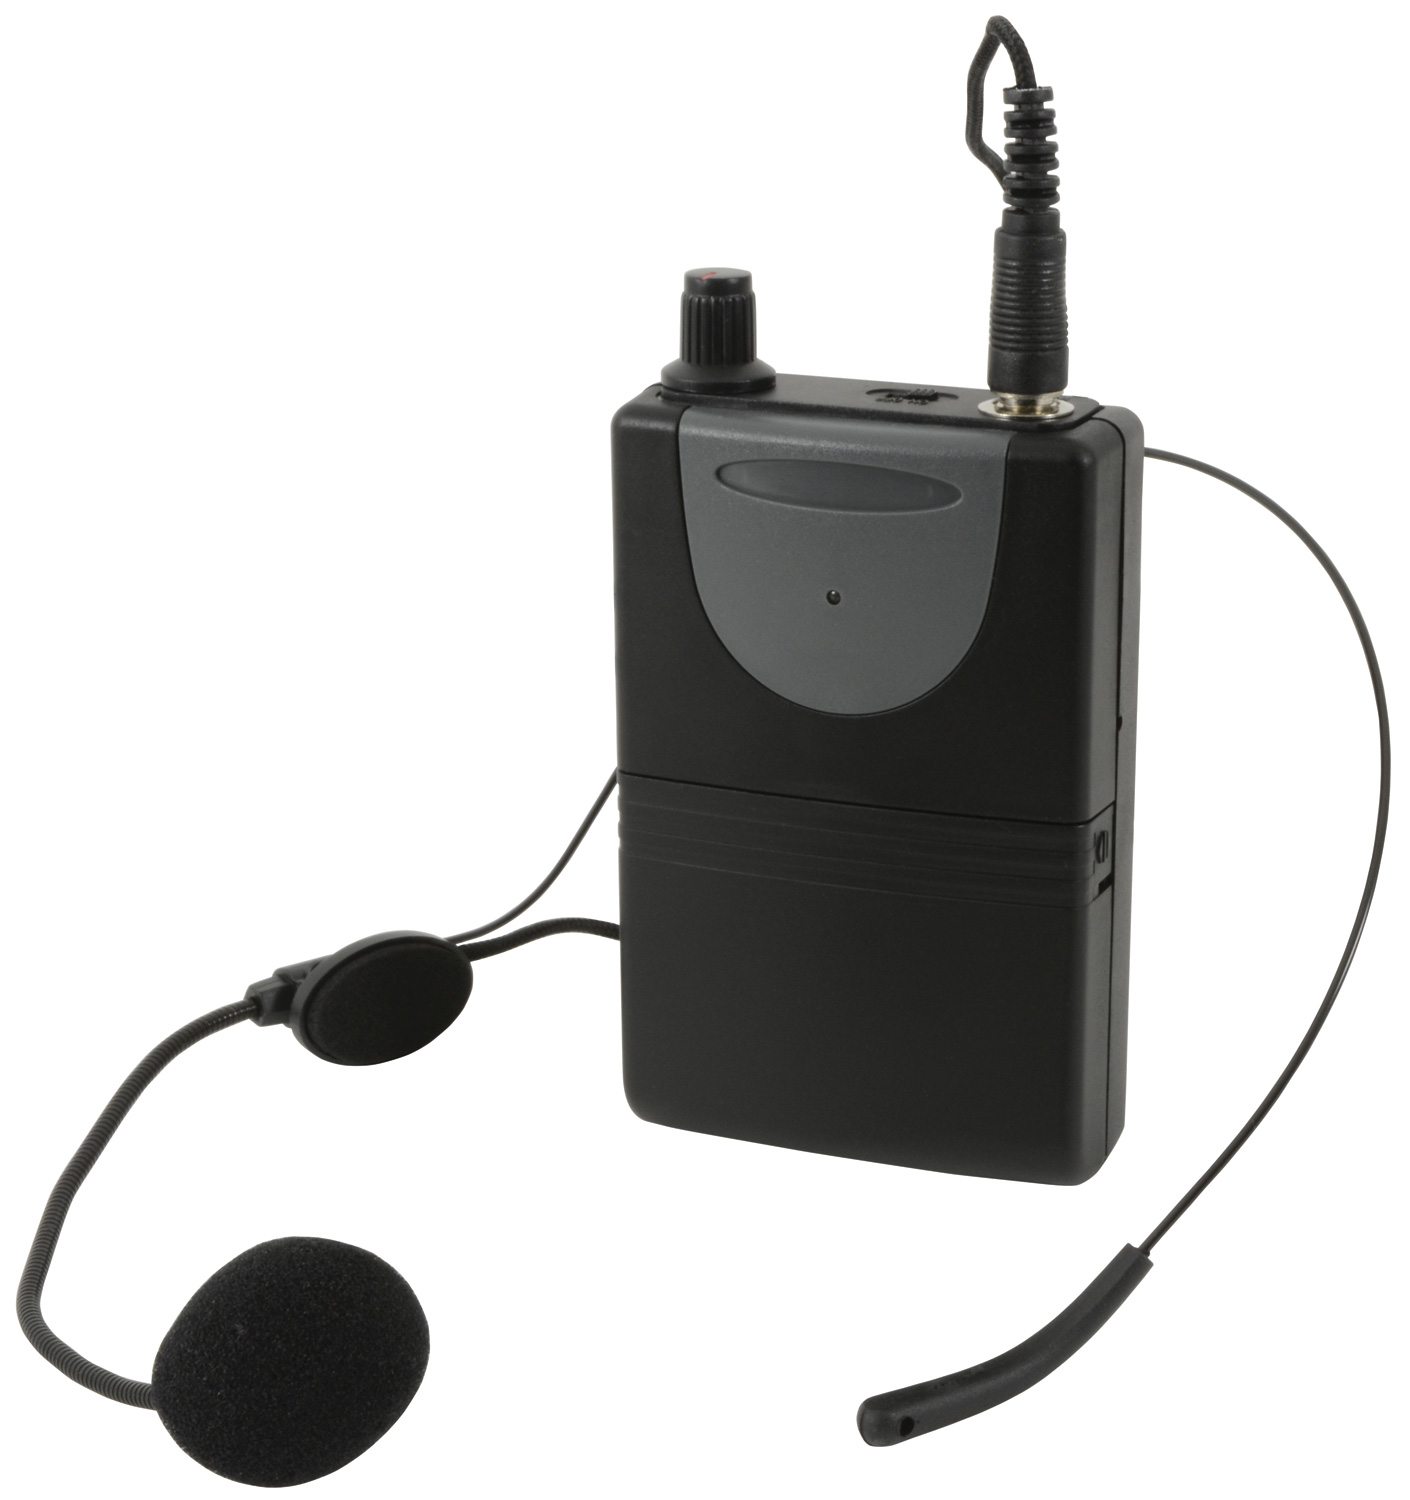 Neckband Mic + Beltpack for QRPA & QXPA Headset for QR+QXPA - 175.0MHz